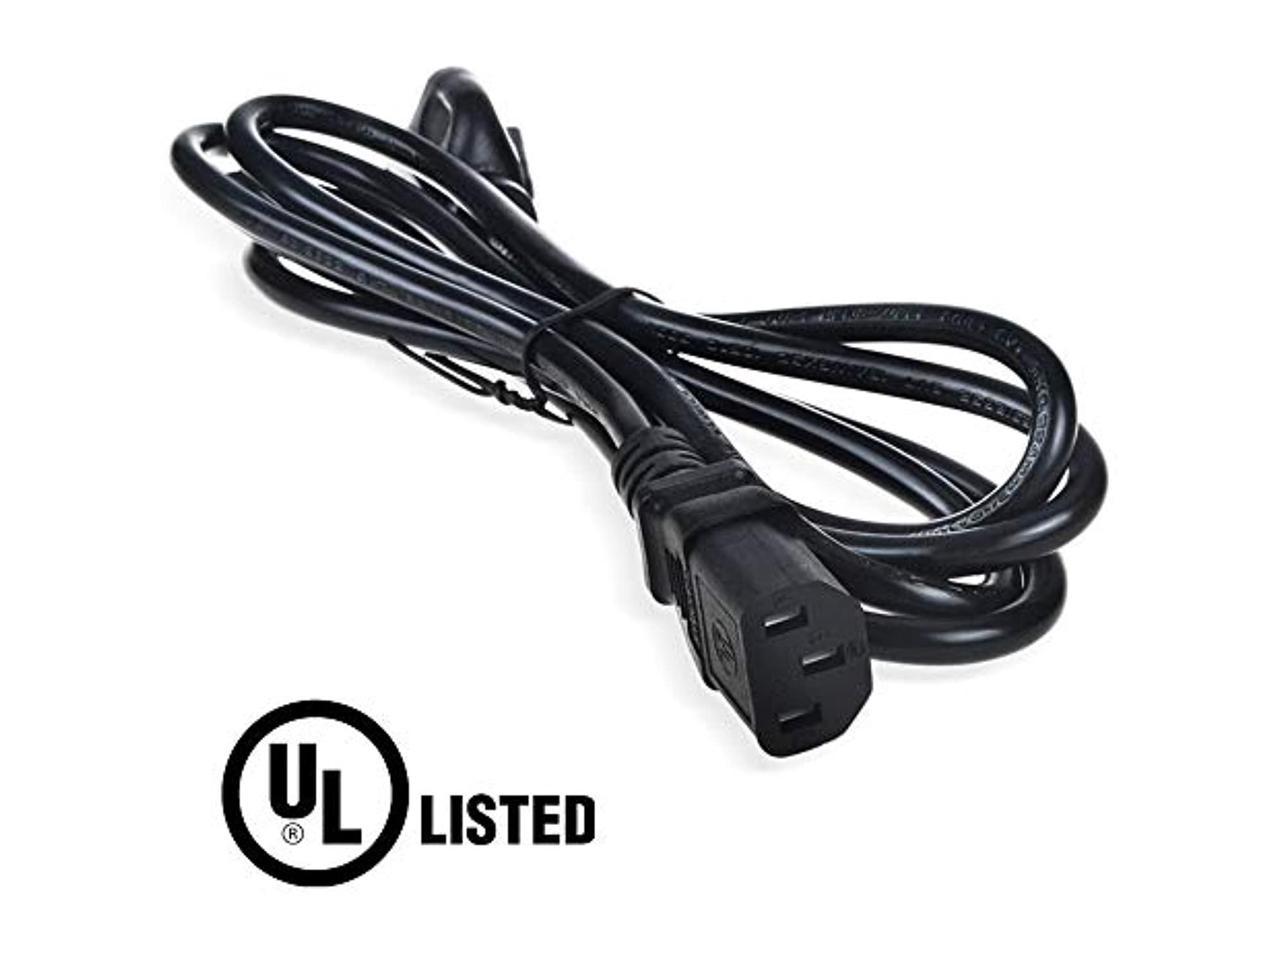 Power Cable Cord for BowFlex TreadClimber Model TC5500 3-Prong 5ft 